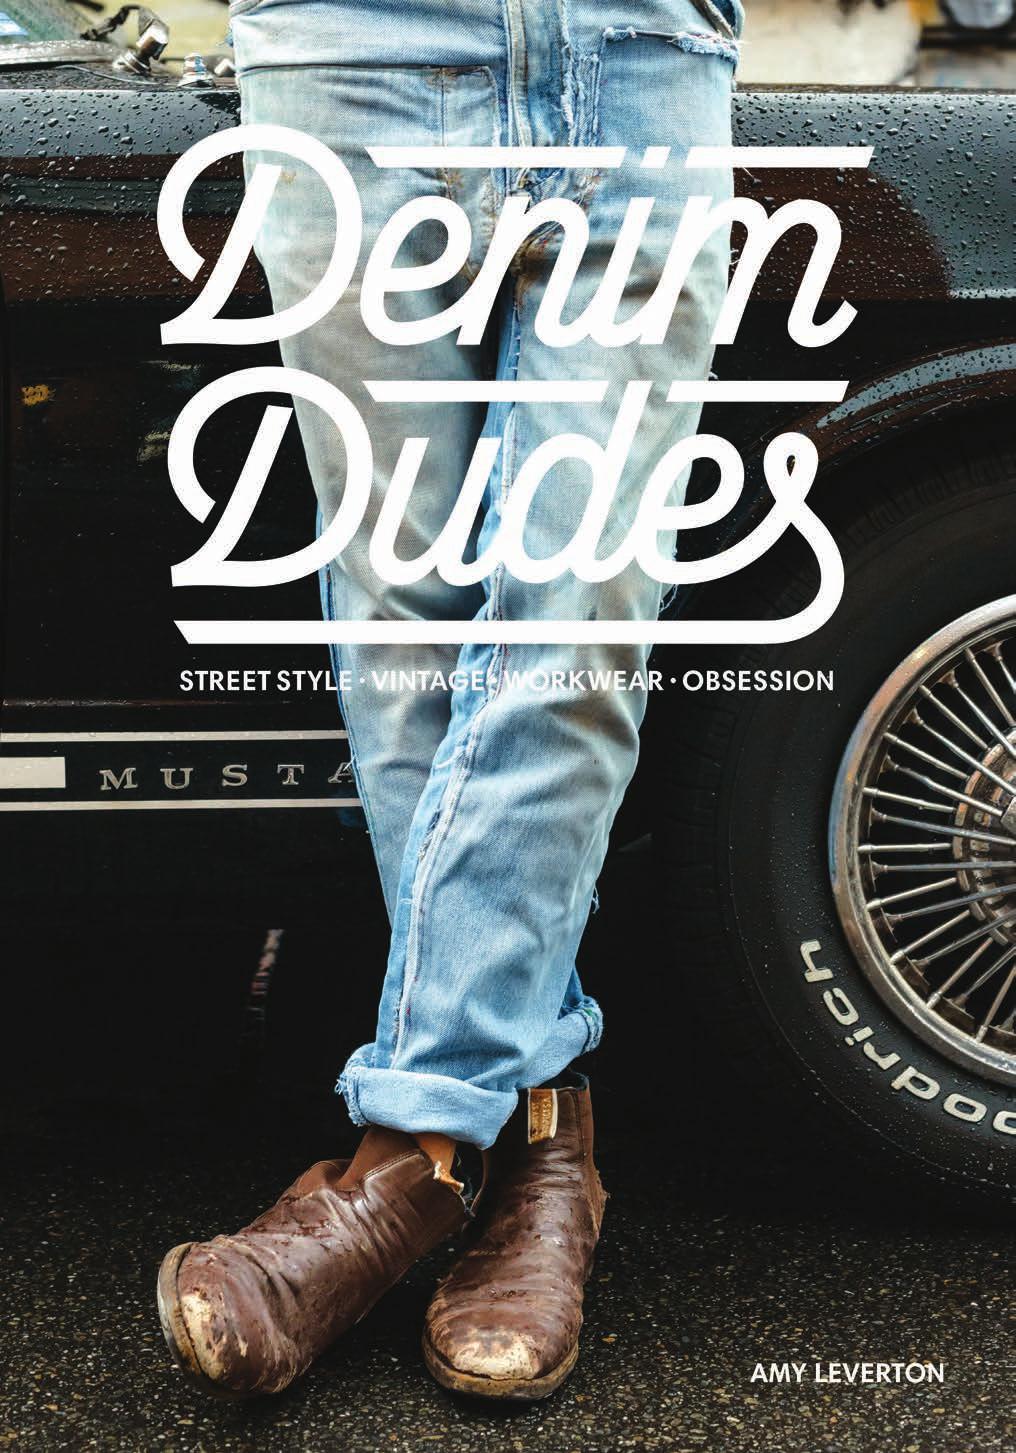 Denim Dudes: Street Style Vintage Workwear Obsession by Amy Leverton